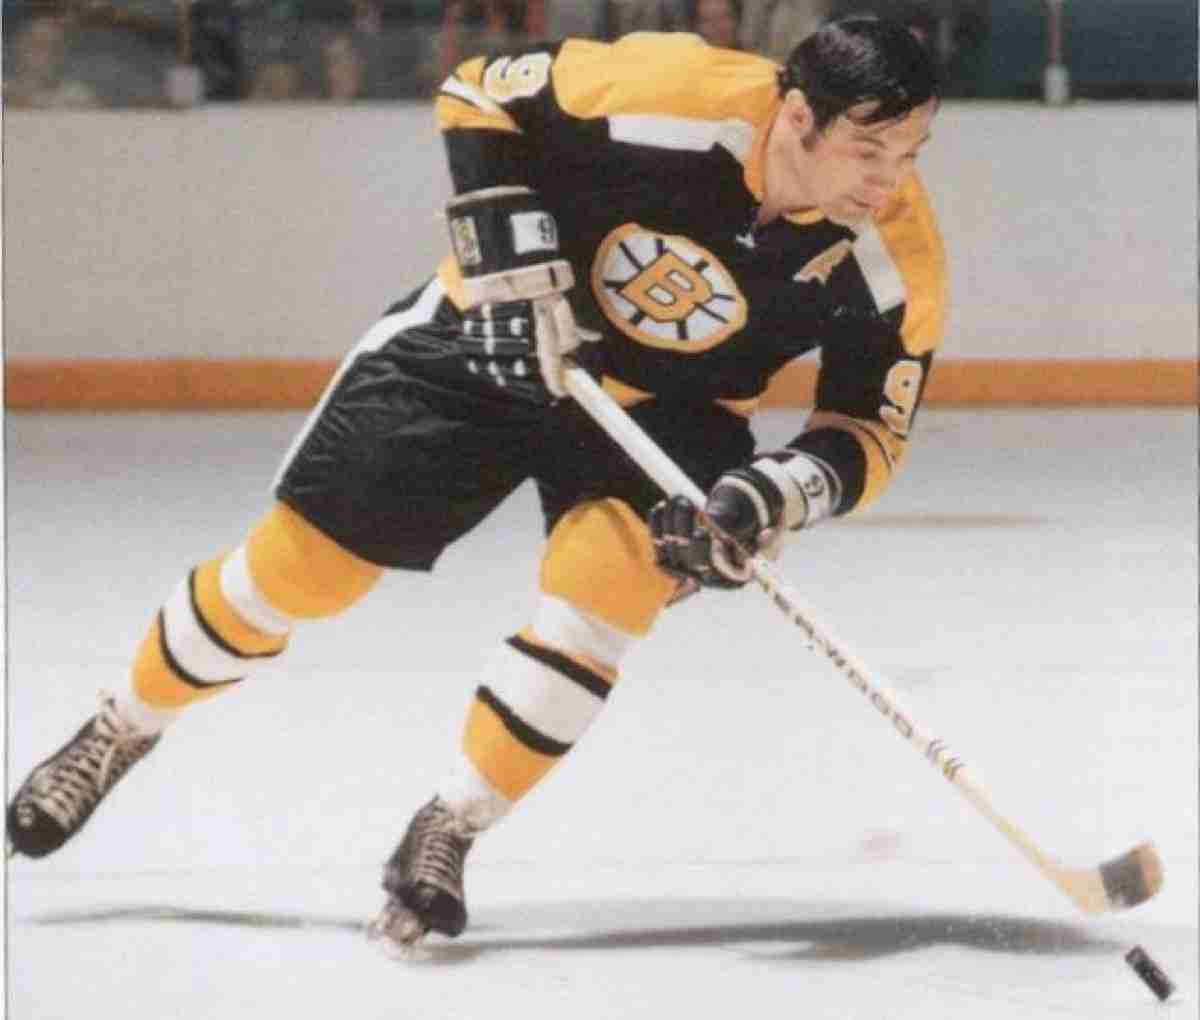 Bruins legend Johnny Bucyk, 79, still plays a vital role for his